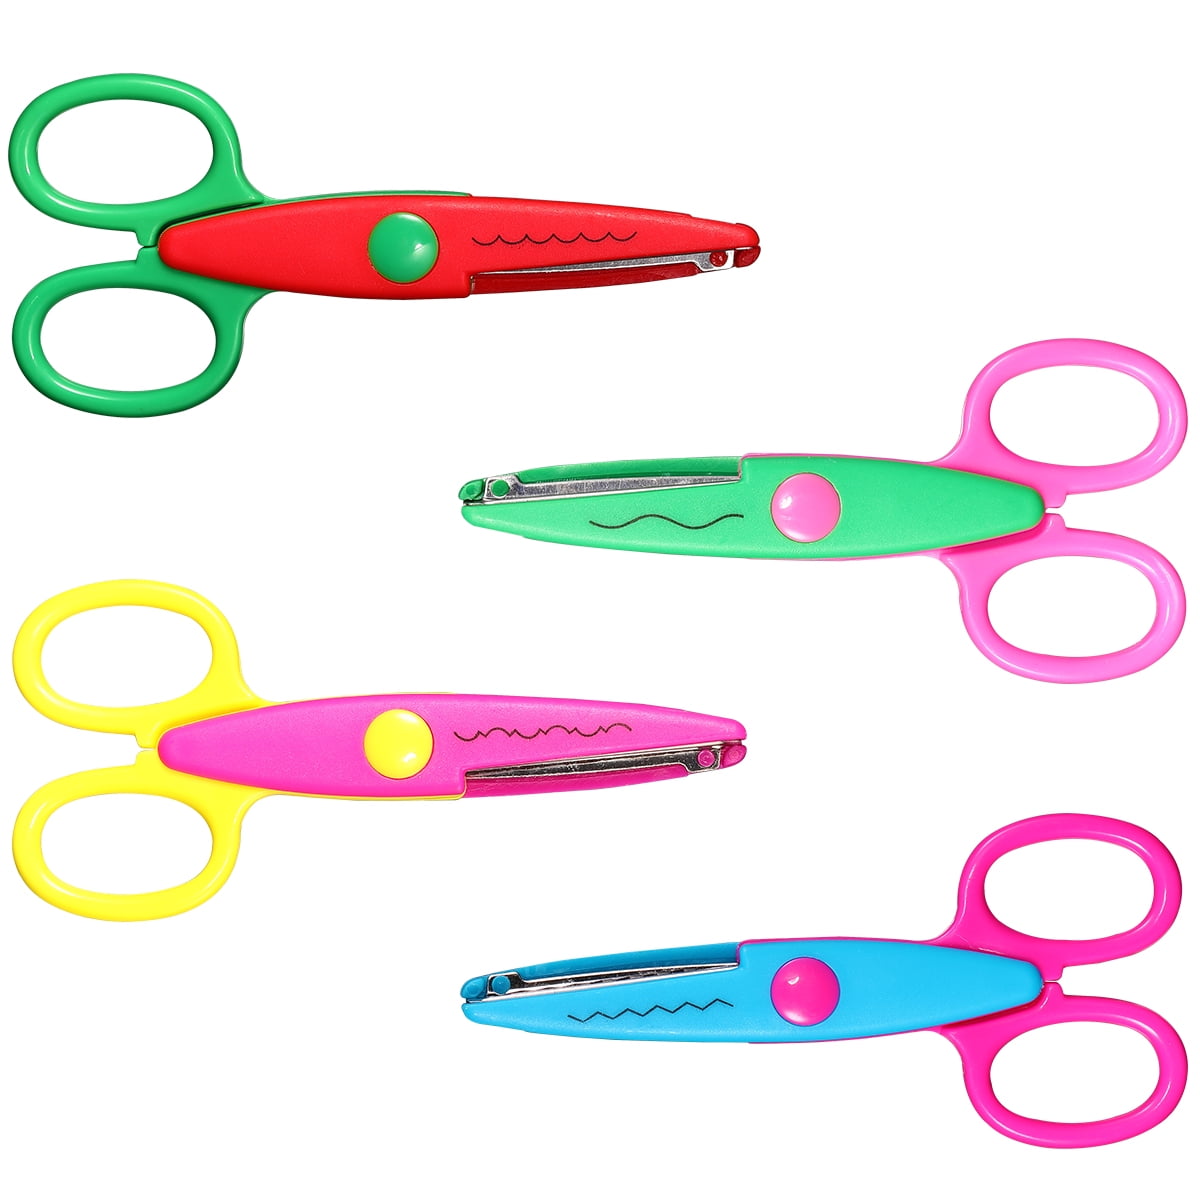 3 Pcs Kids Safety Scissors Art Craft Scissors Set Cute Animal Toddlers  Training Scissors For Kids And Students